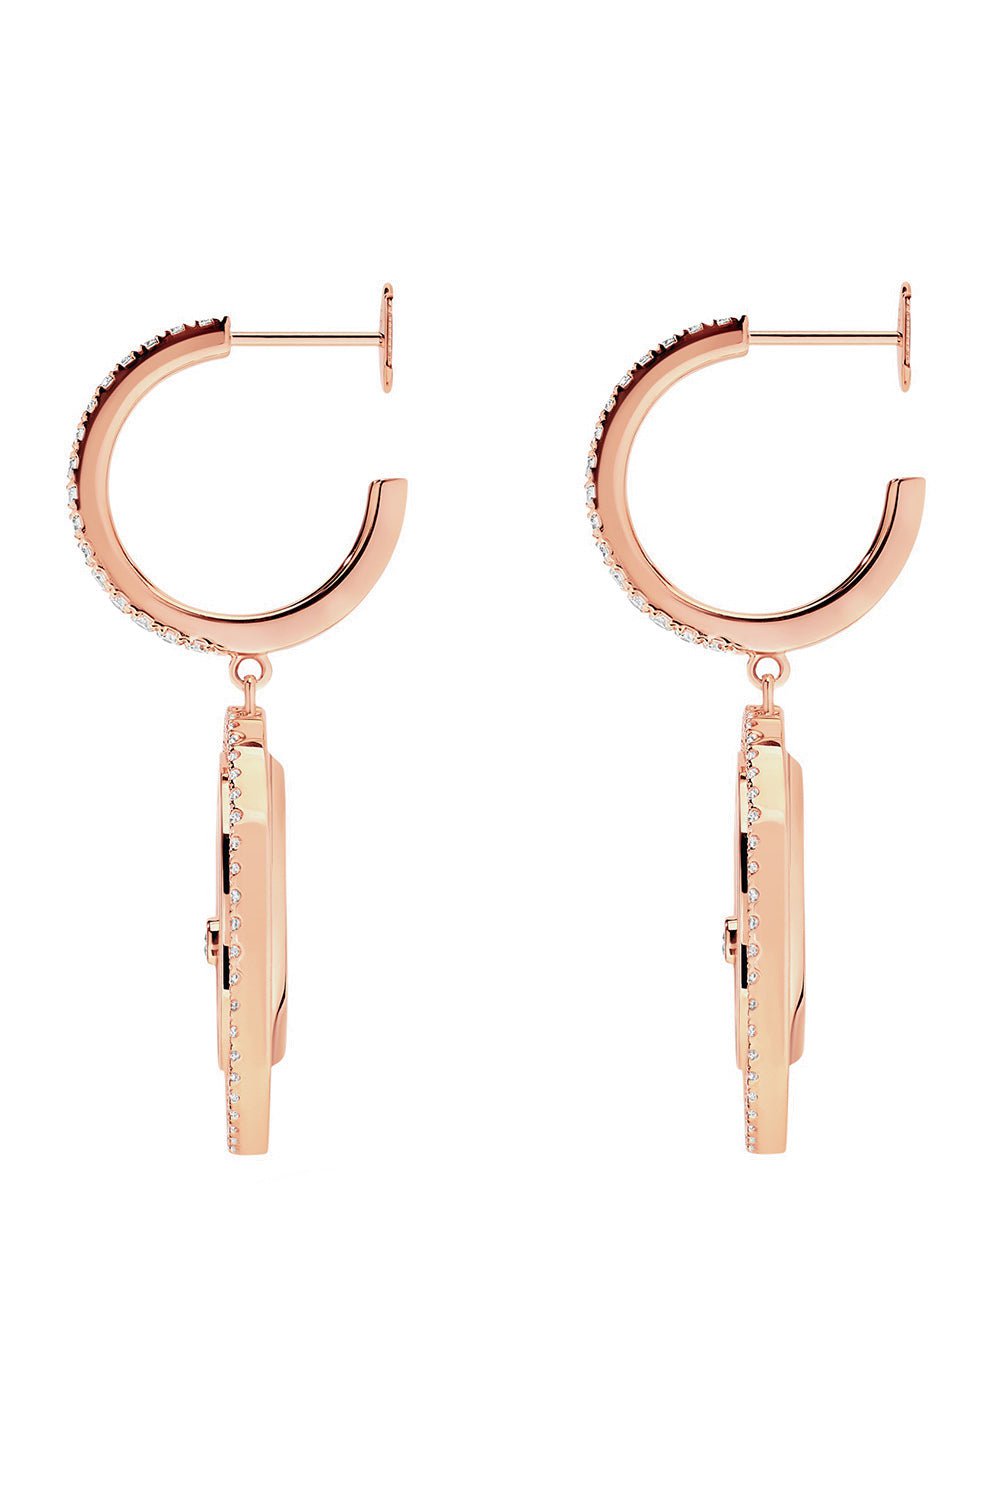 MESSIKA-Lucky Move PM Earrings-ROSE GOLD